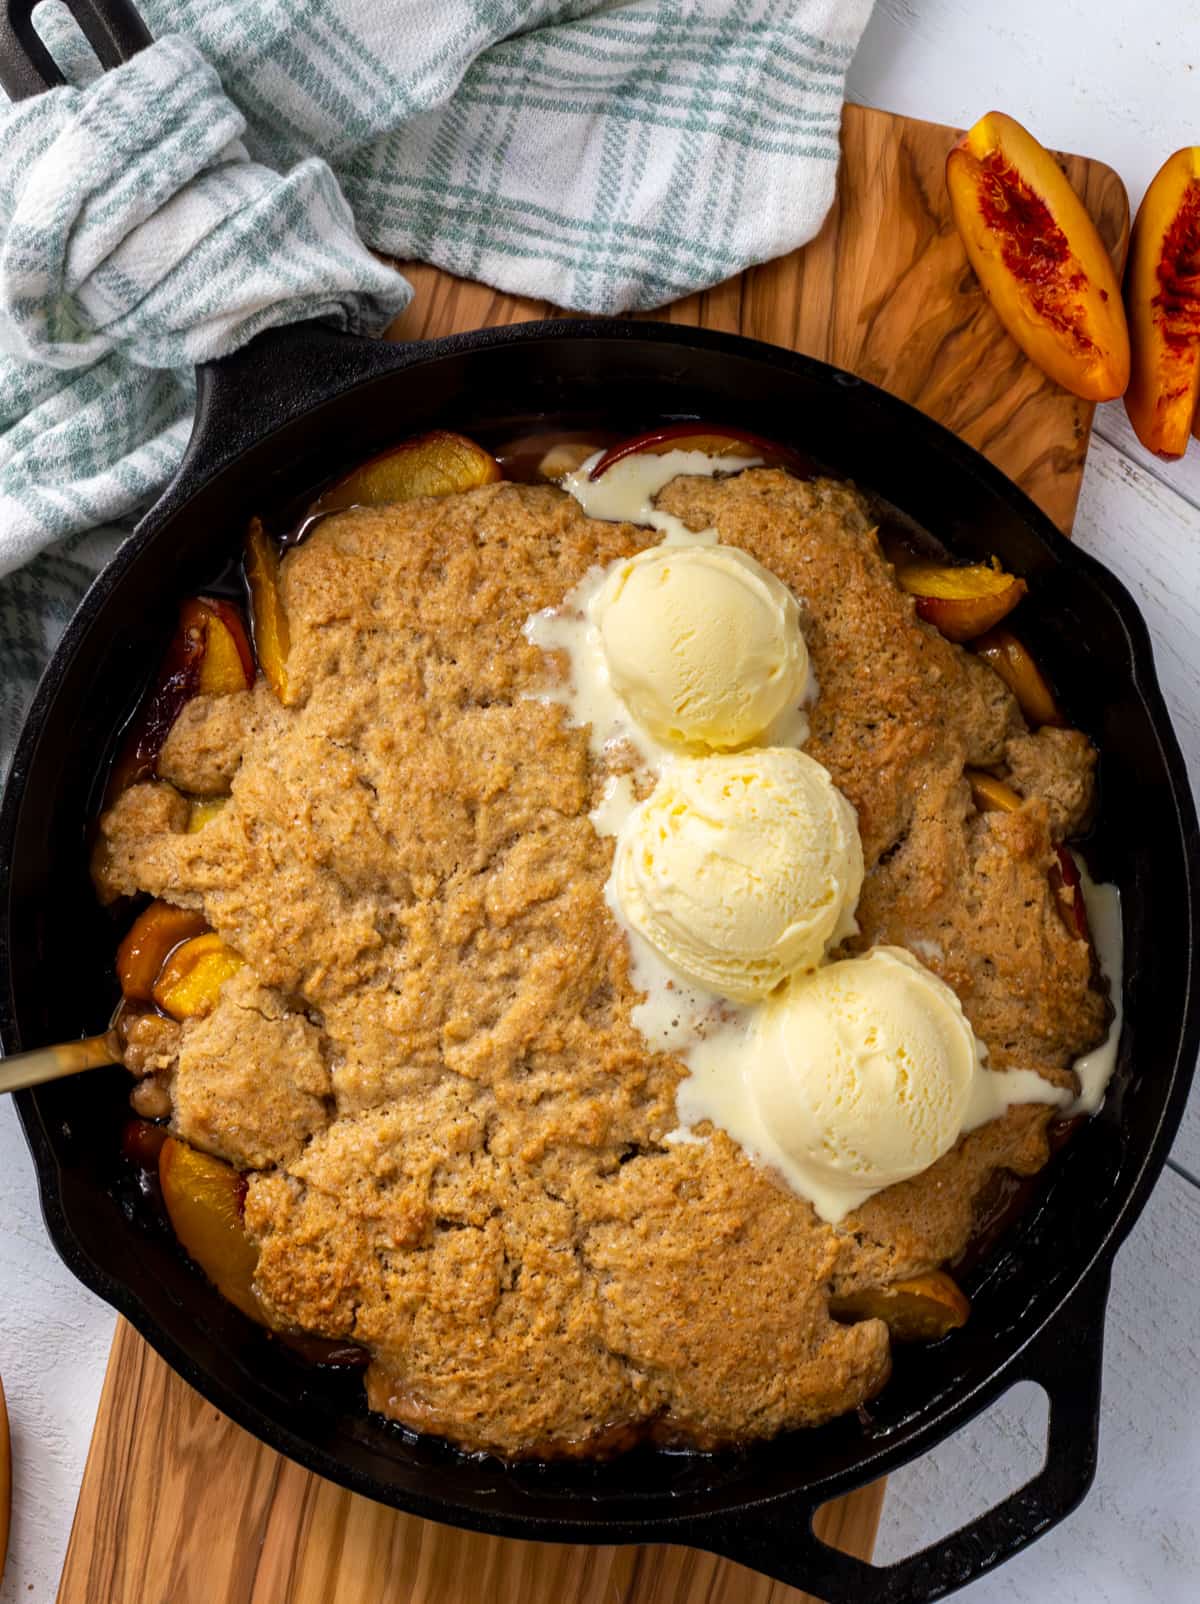 Peach cobbler in a cast iron pan topped with three scoops of vanilla ice cream on a wood board with fresh slices of peaches.